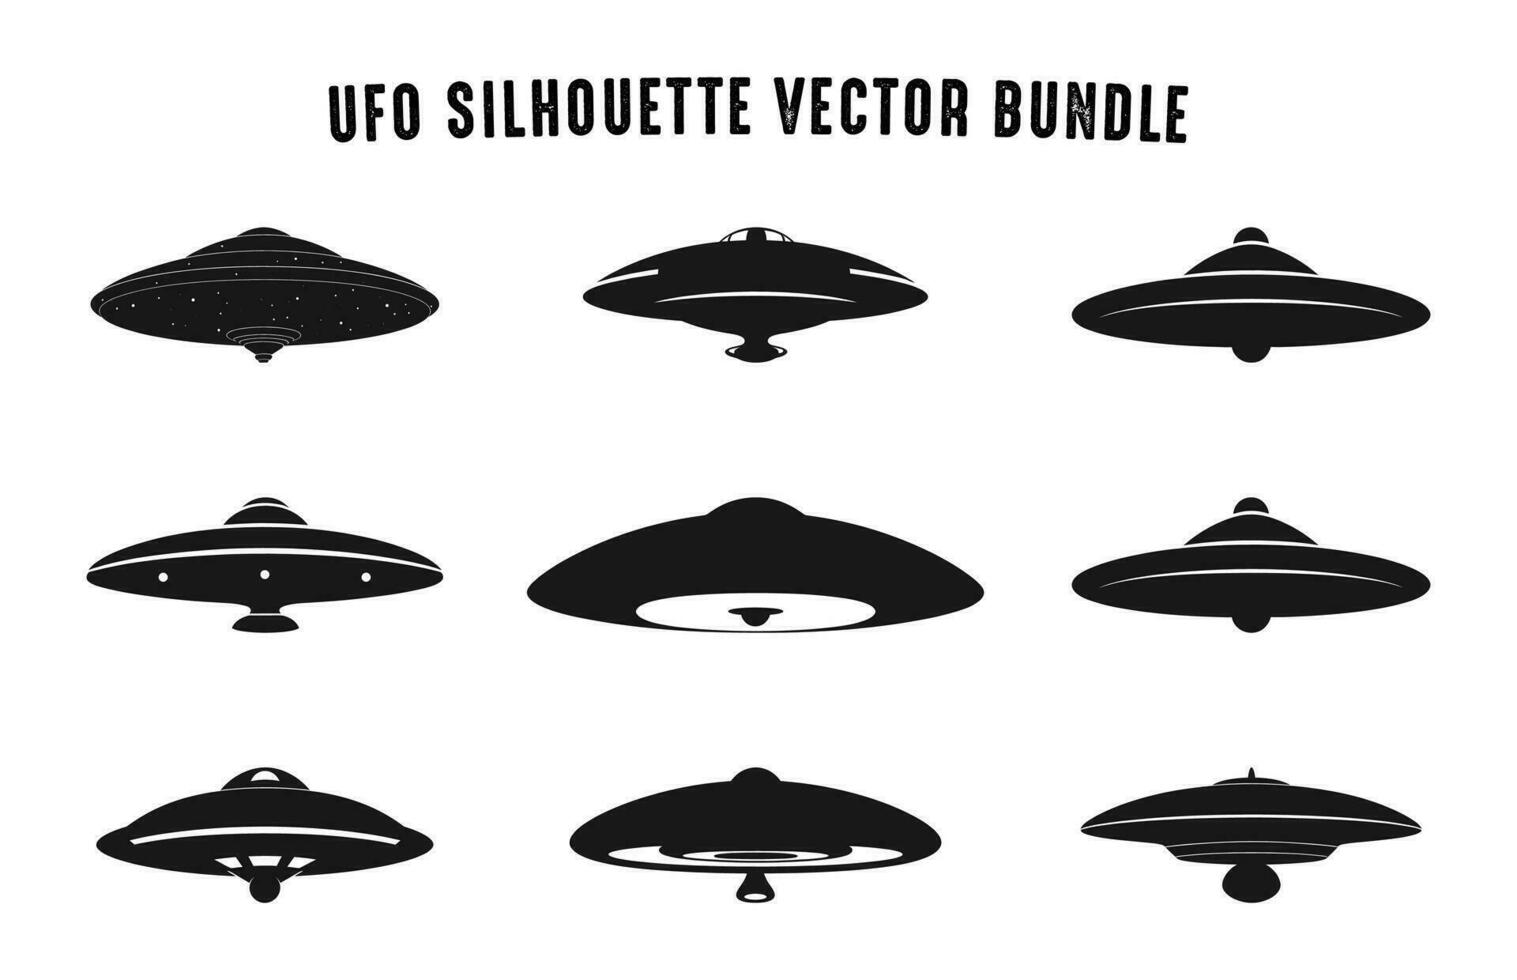 UFO Silhouette black vector Set, Flying saucer Silhouettes bundle, Spaceship UFO icon Collection